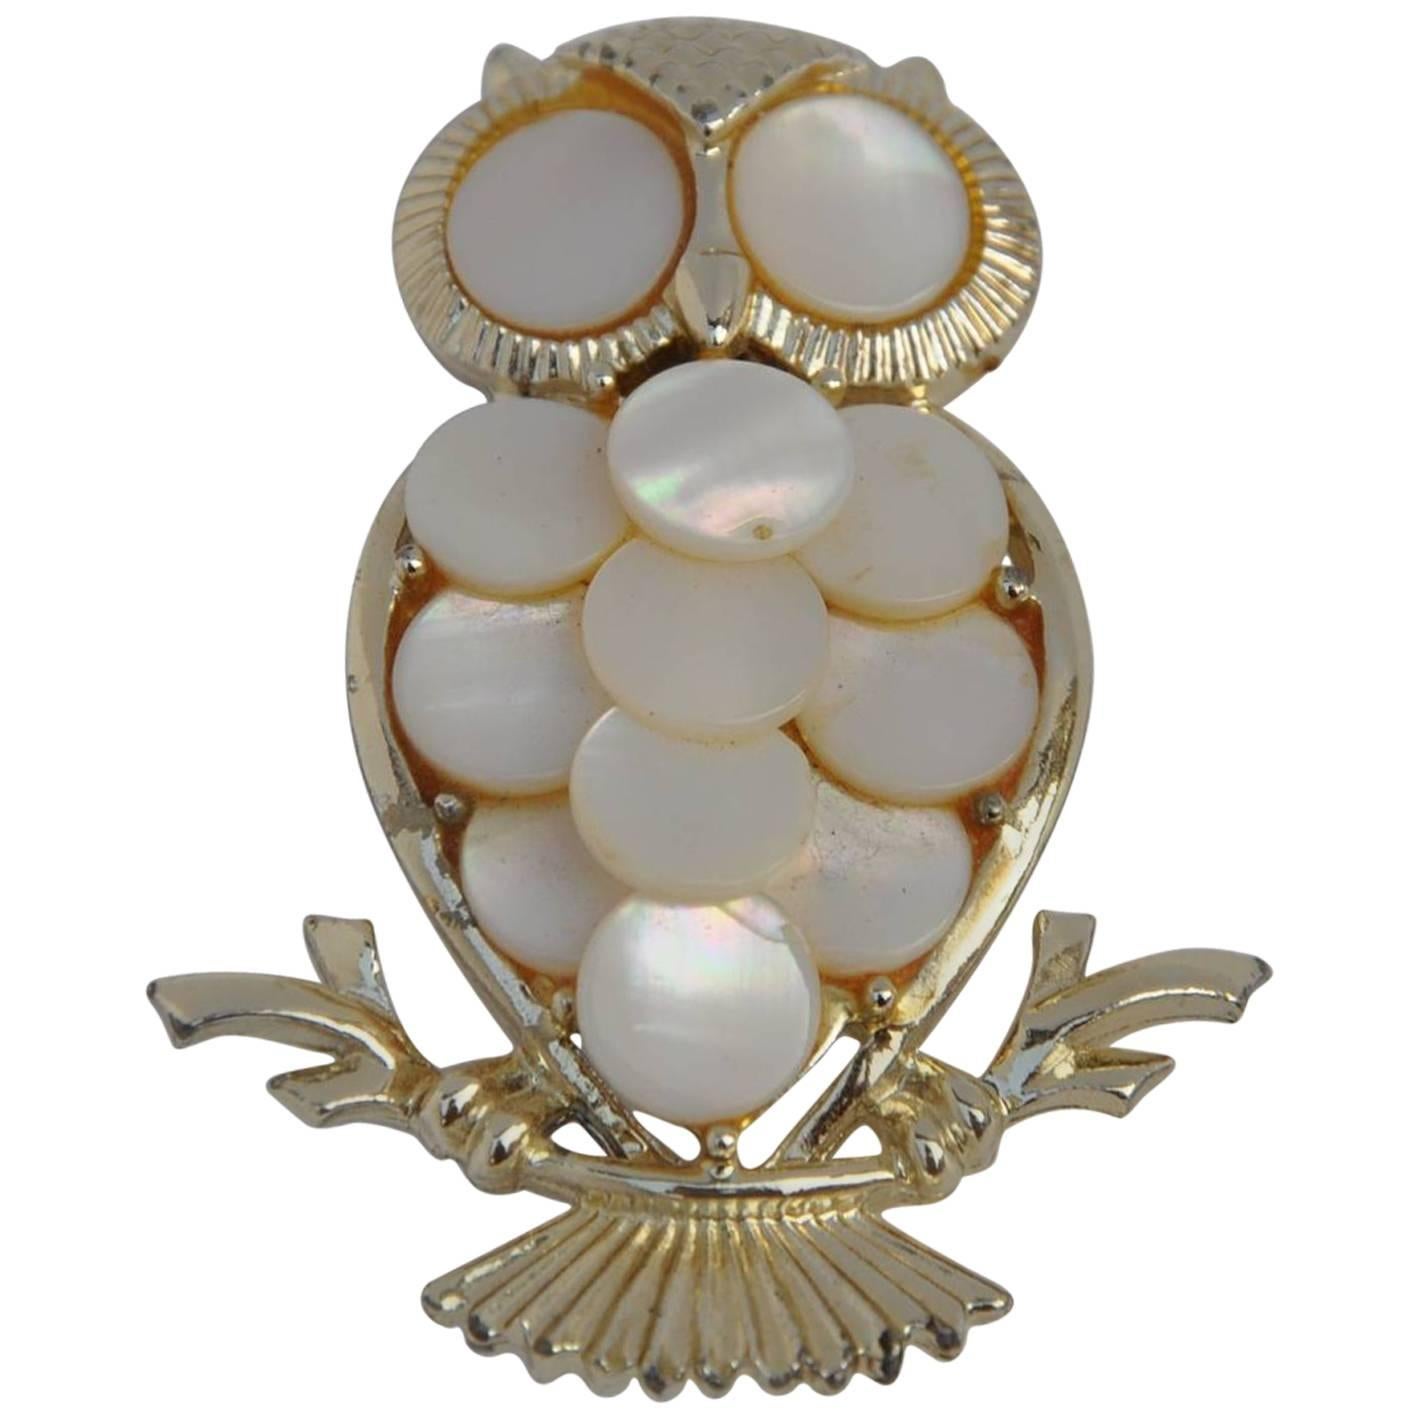 Gilded Gold with Mother of Pearl "Owl" Brooch